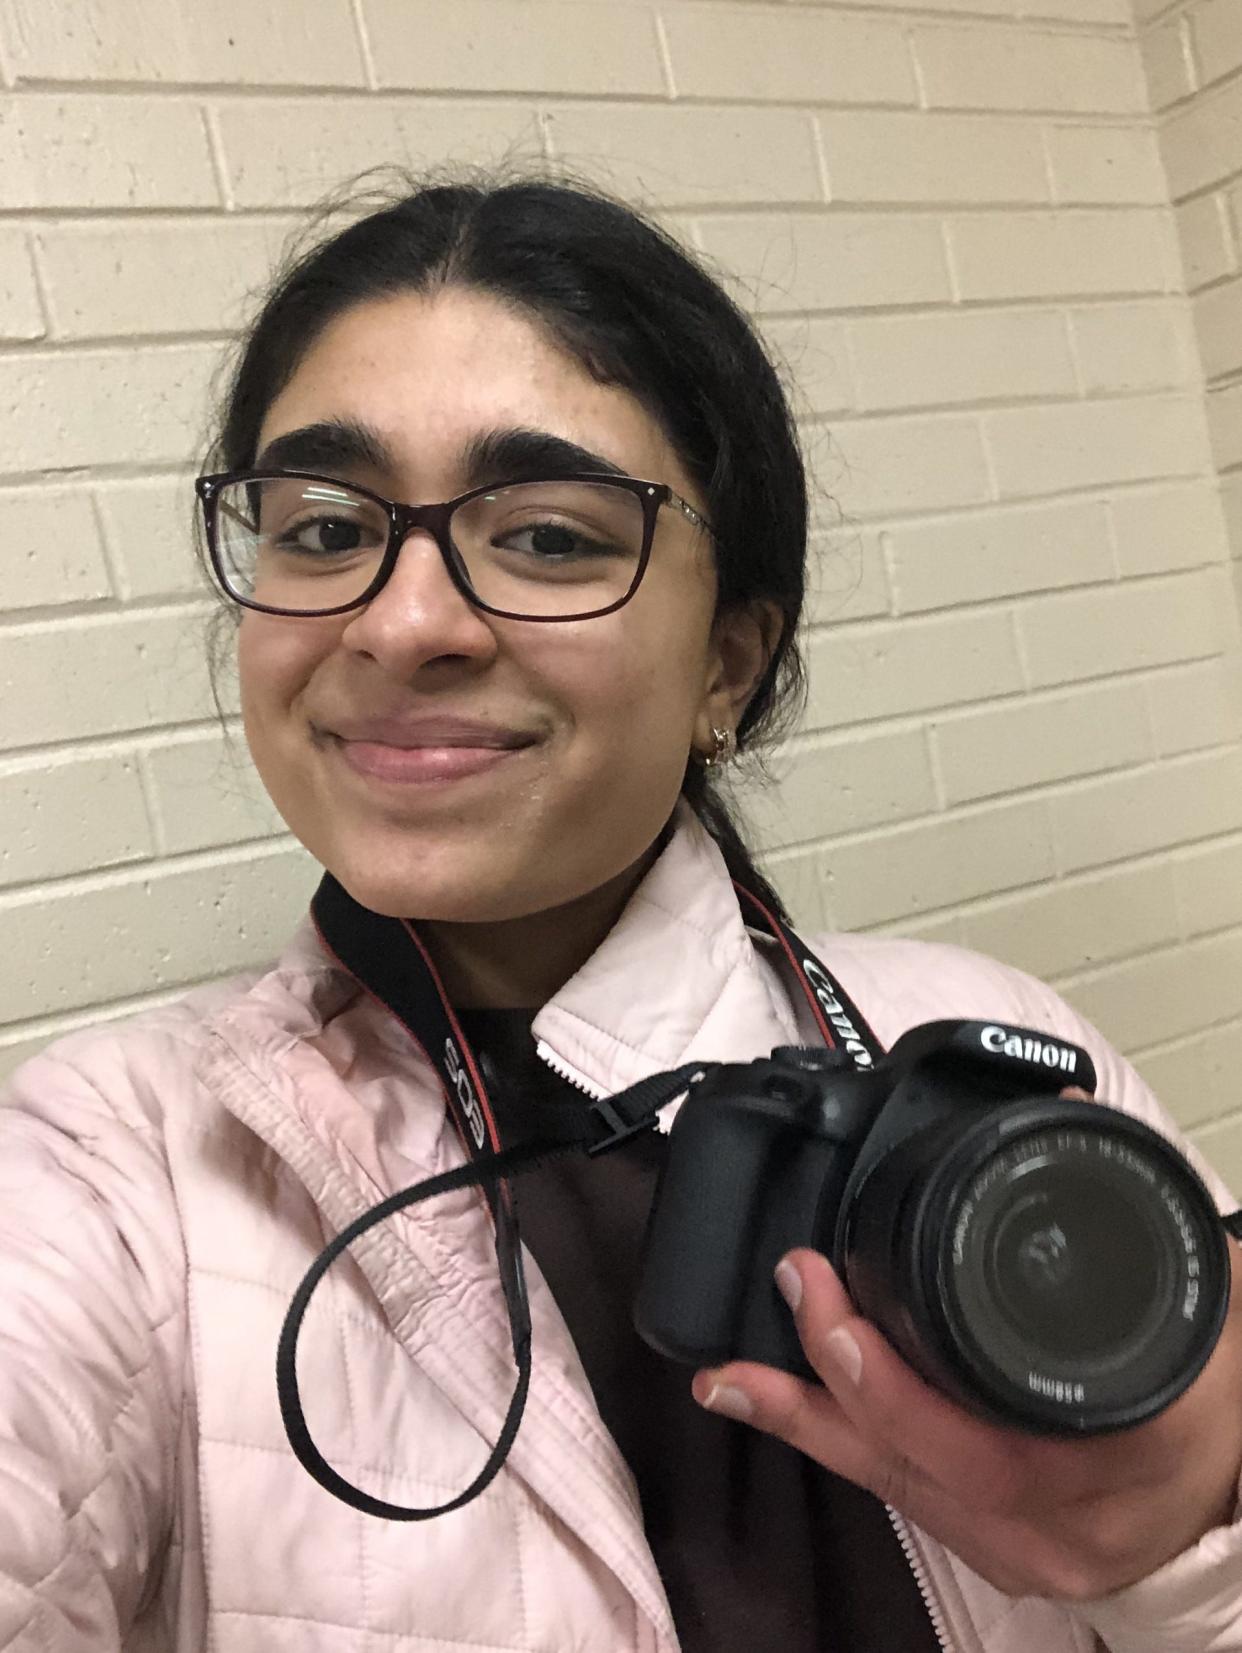 Eiman Mir, a senior at Brookfield East High School, was recognized by the Wisconsin Journalism Education Association as Wisconsin Journalist of the Year.